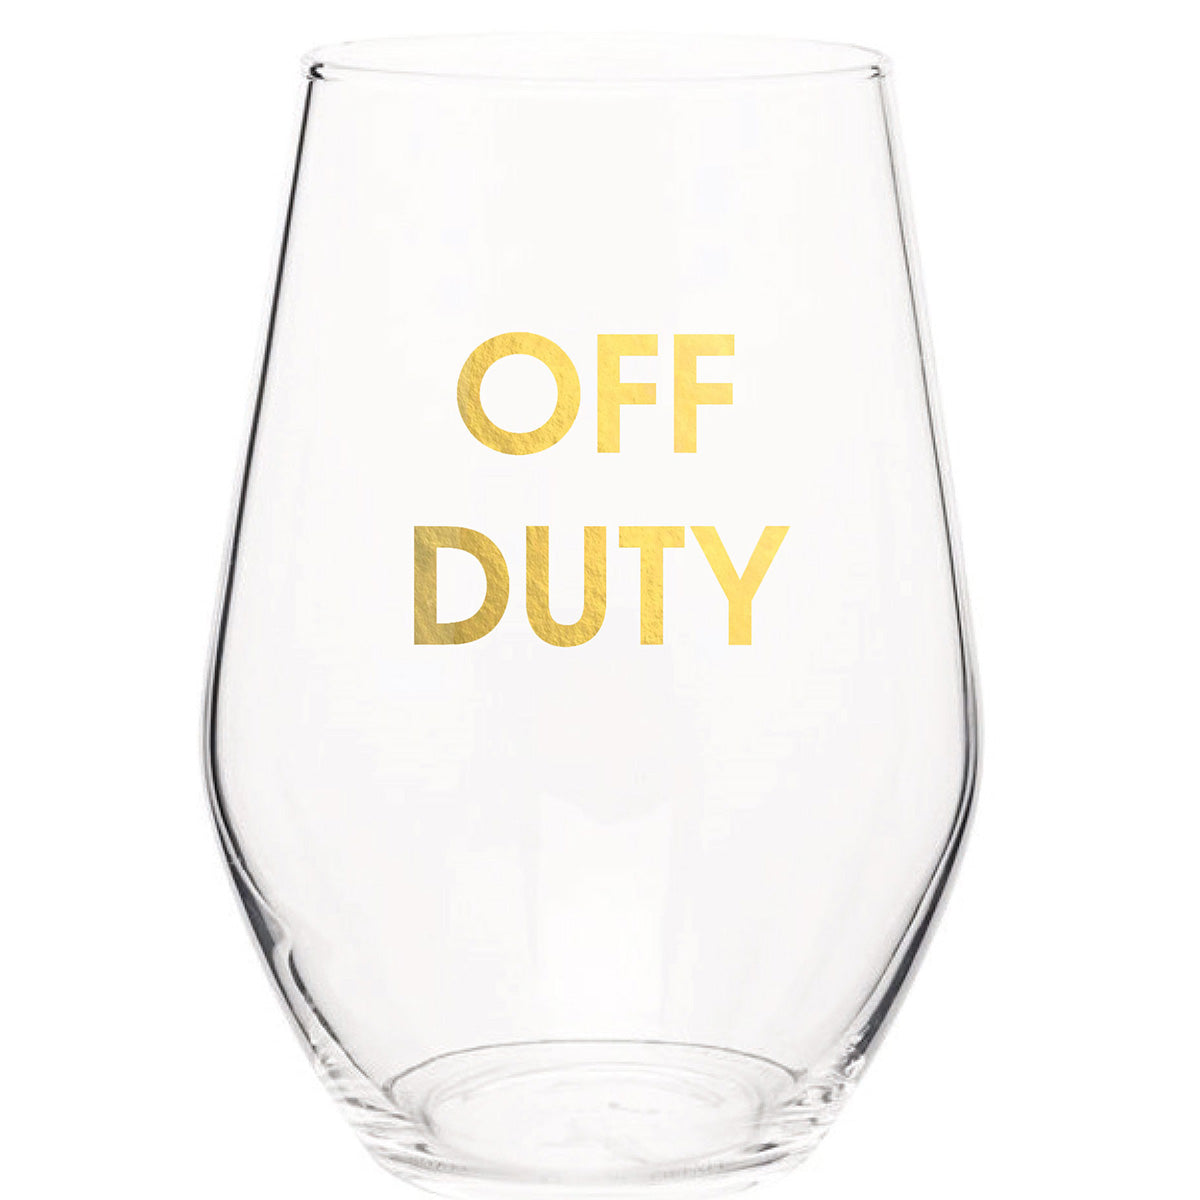 Off Duty - Gold Foil Stemless Wine Glass (Slight Imperfections)